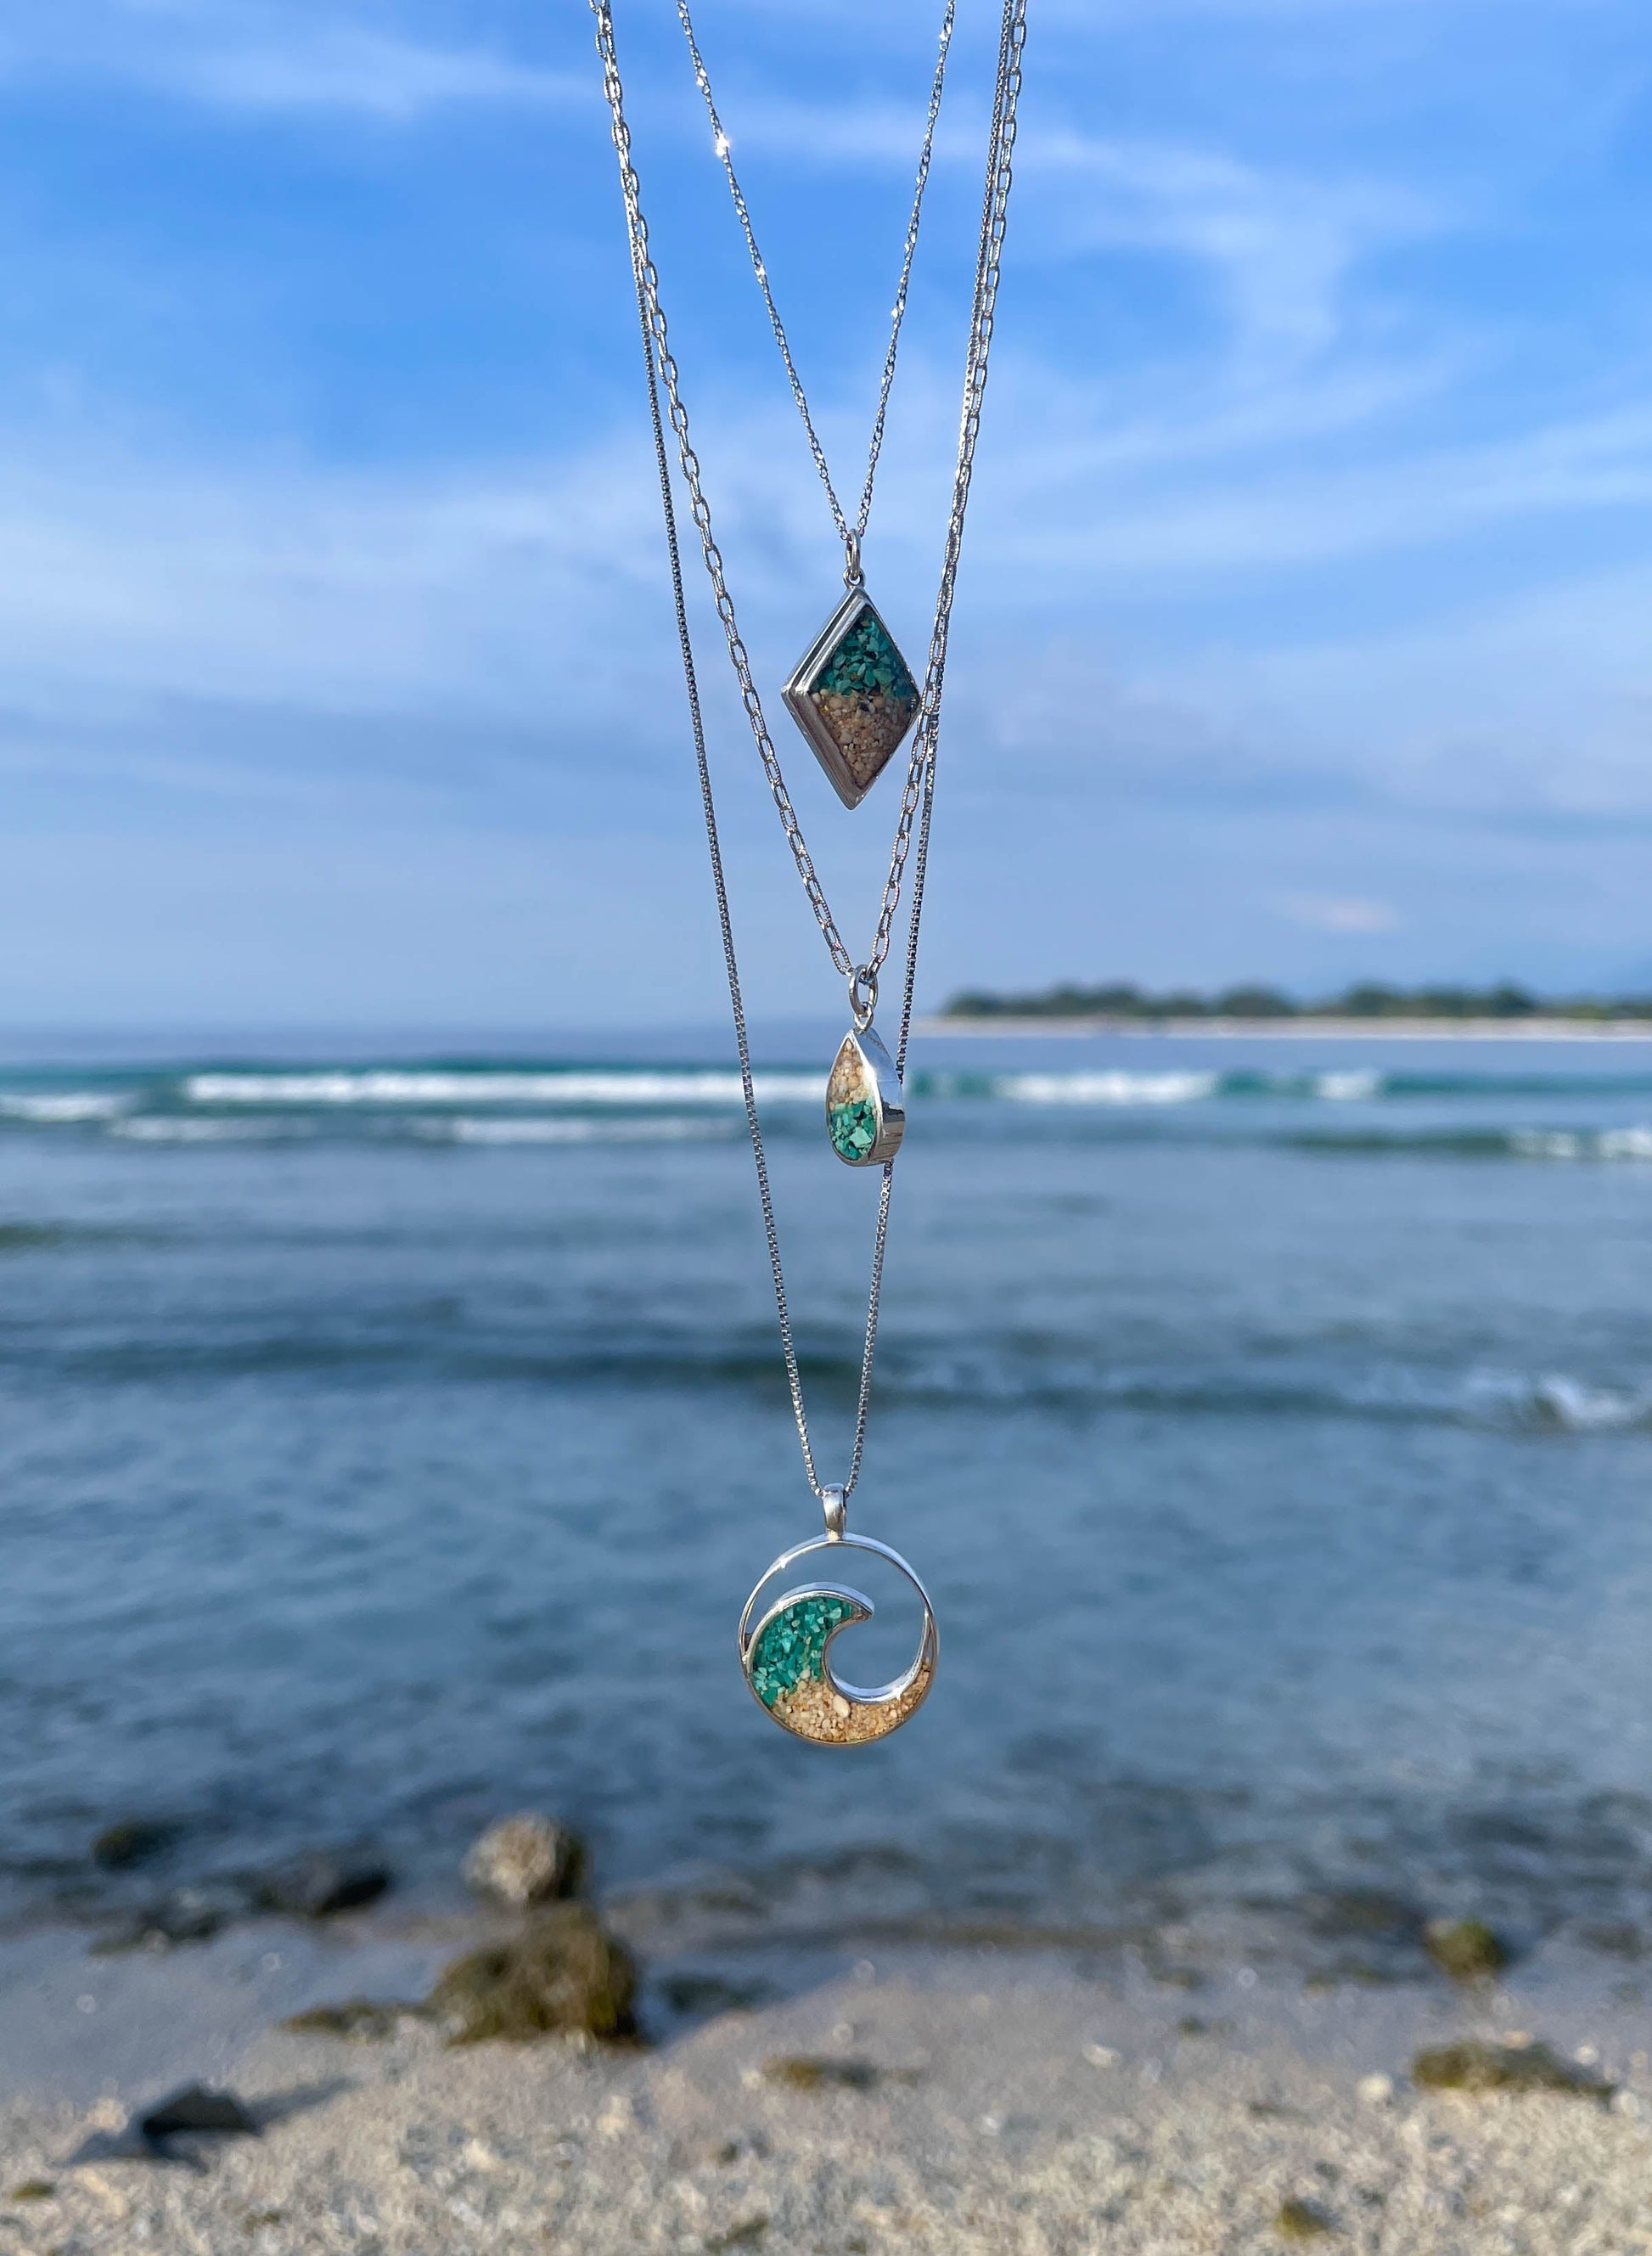 I Miss Bali Sand Jewellery, Bingin Beach Pendant Necklace with ocean in the background, Handmade in Bali